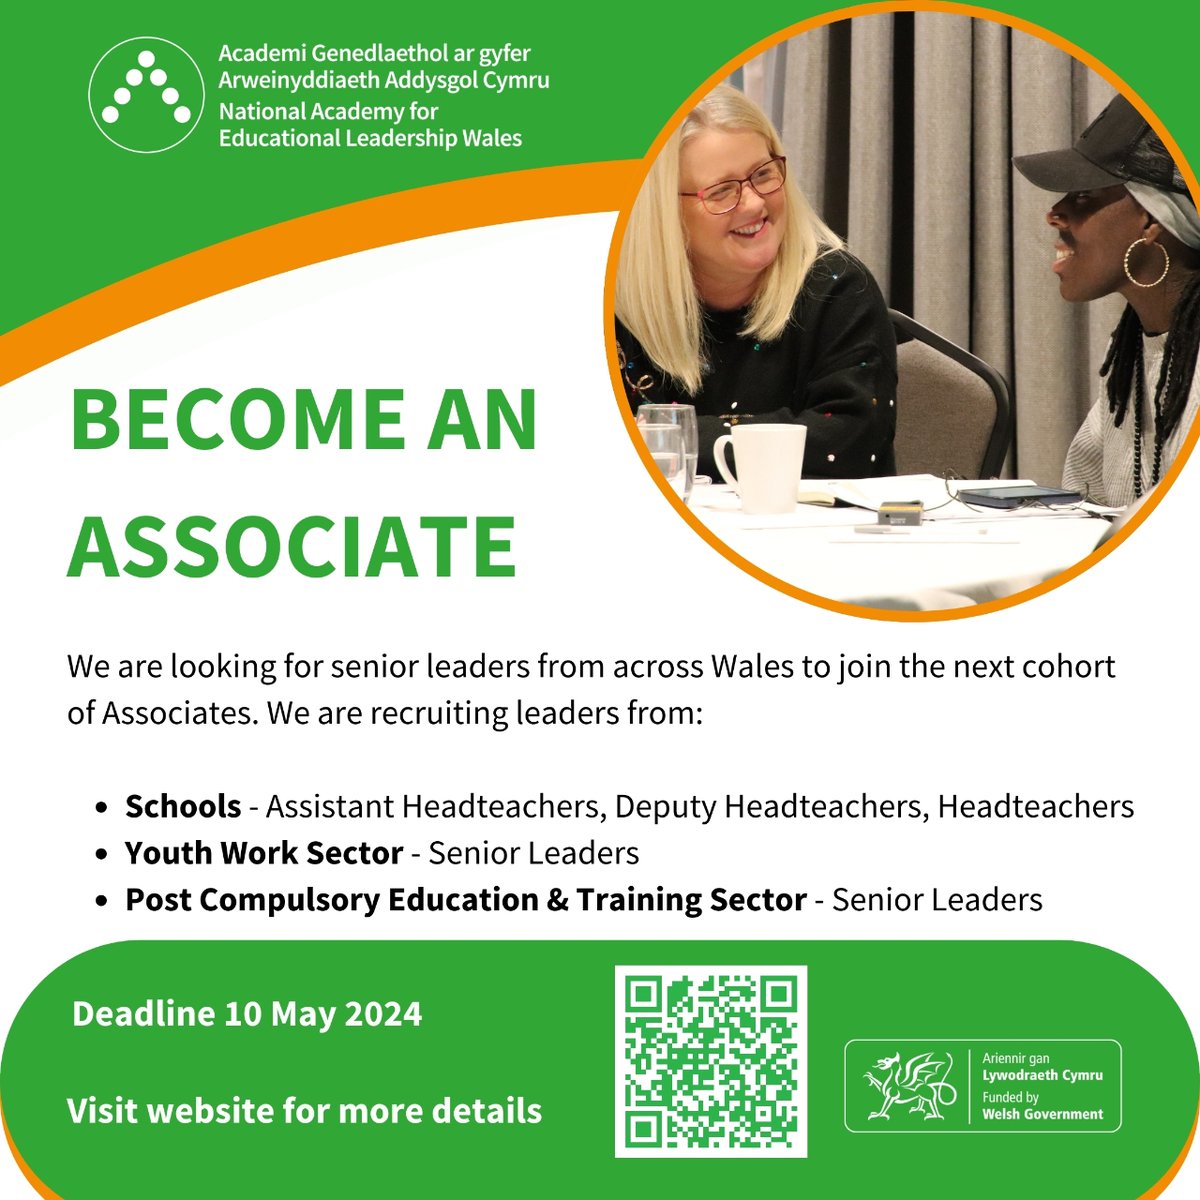 @NAELCymru are looking for senior leaders from across Wales to join the next cohort of Associates. They're interested in appointing senior leaders from a range of educational settings across Wales including the #YouthWork sector. Why apply? nael.cymru/en/become-an-a… #leadership